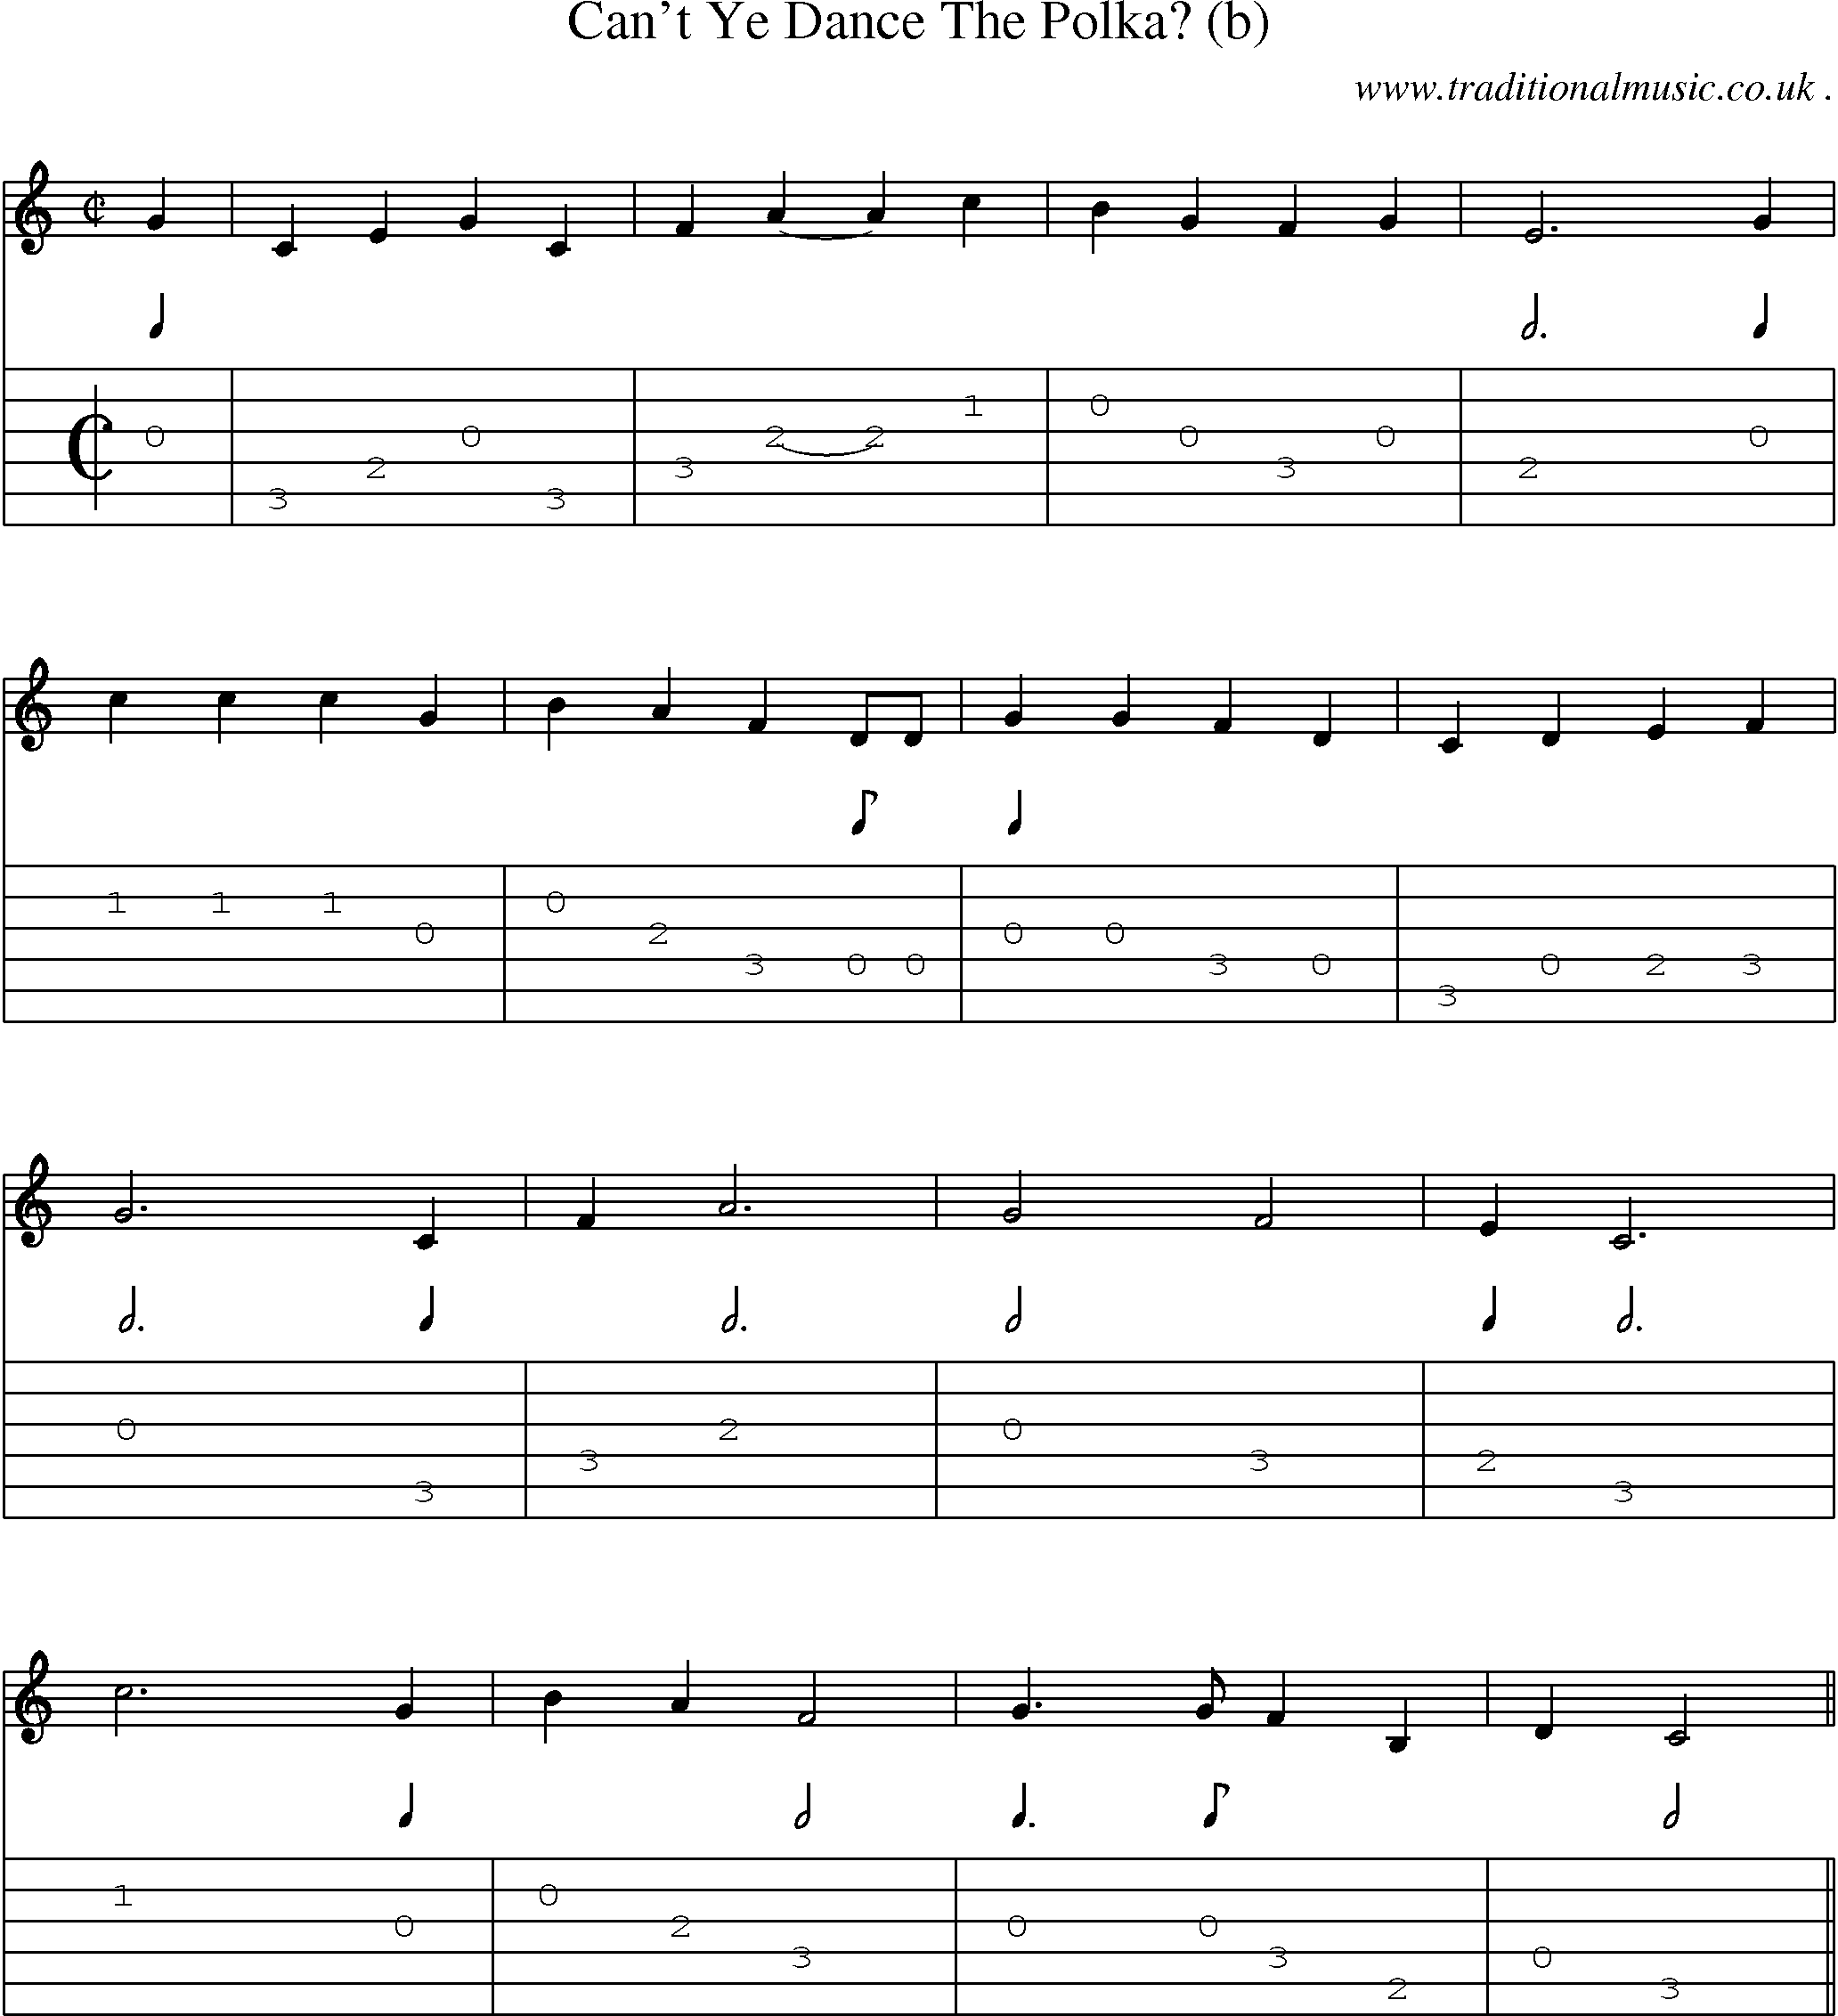 Sheet-Music and Guitar Tabs for Cant Ye Dance The Polka (b)